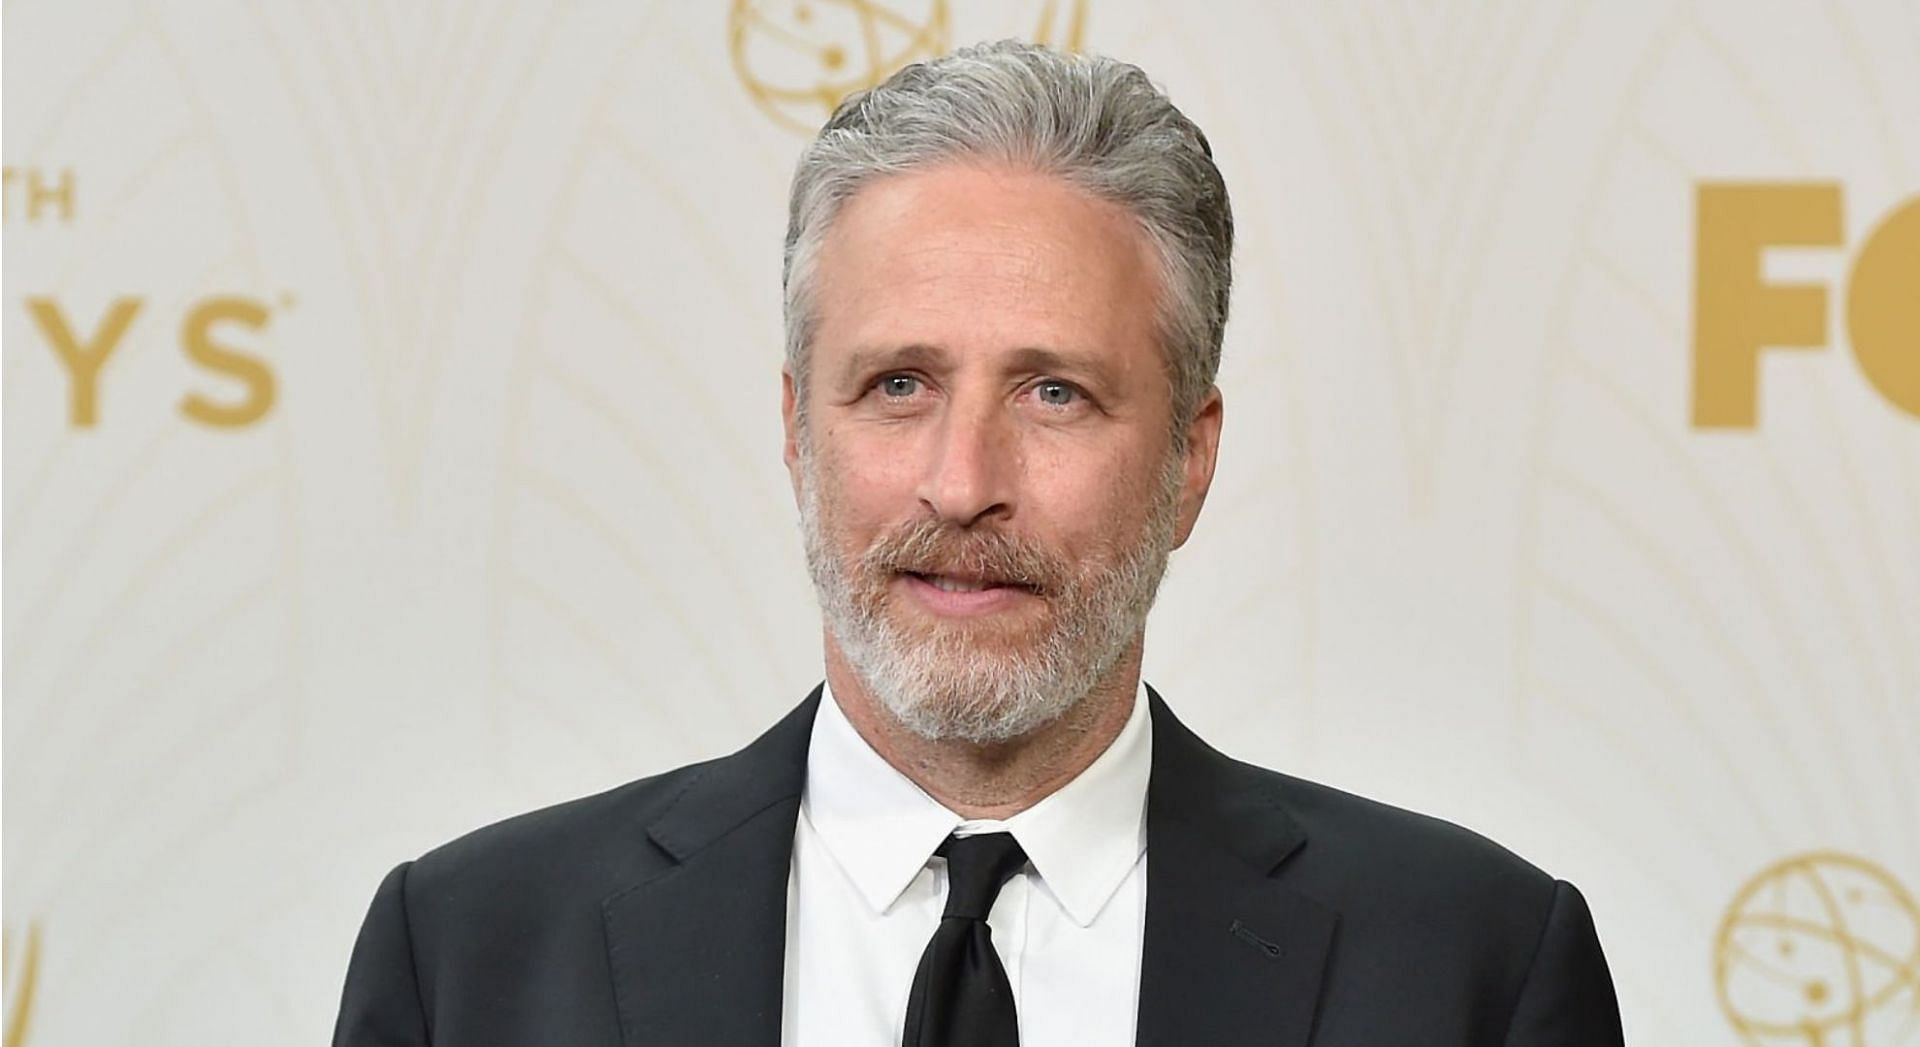 Comedian and activist Jon Stewart called out Republicans for blocking burn pits bill (Image via Alberto E. Rodriguez/Getty Images)